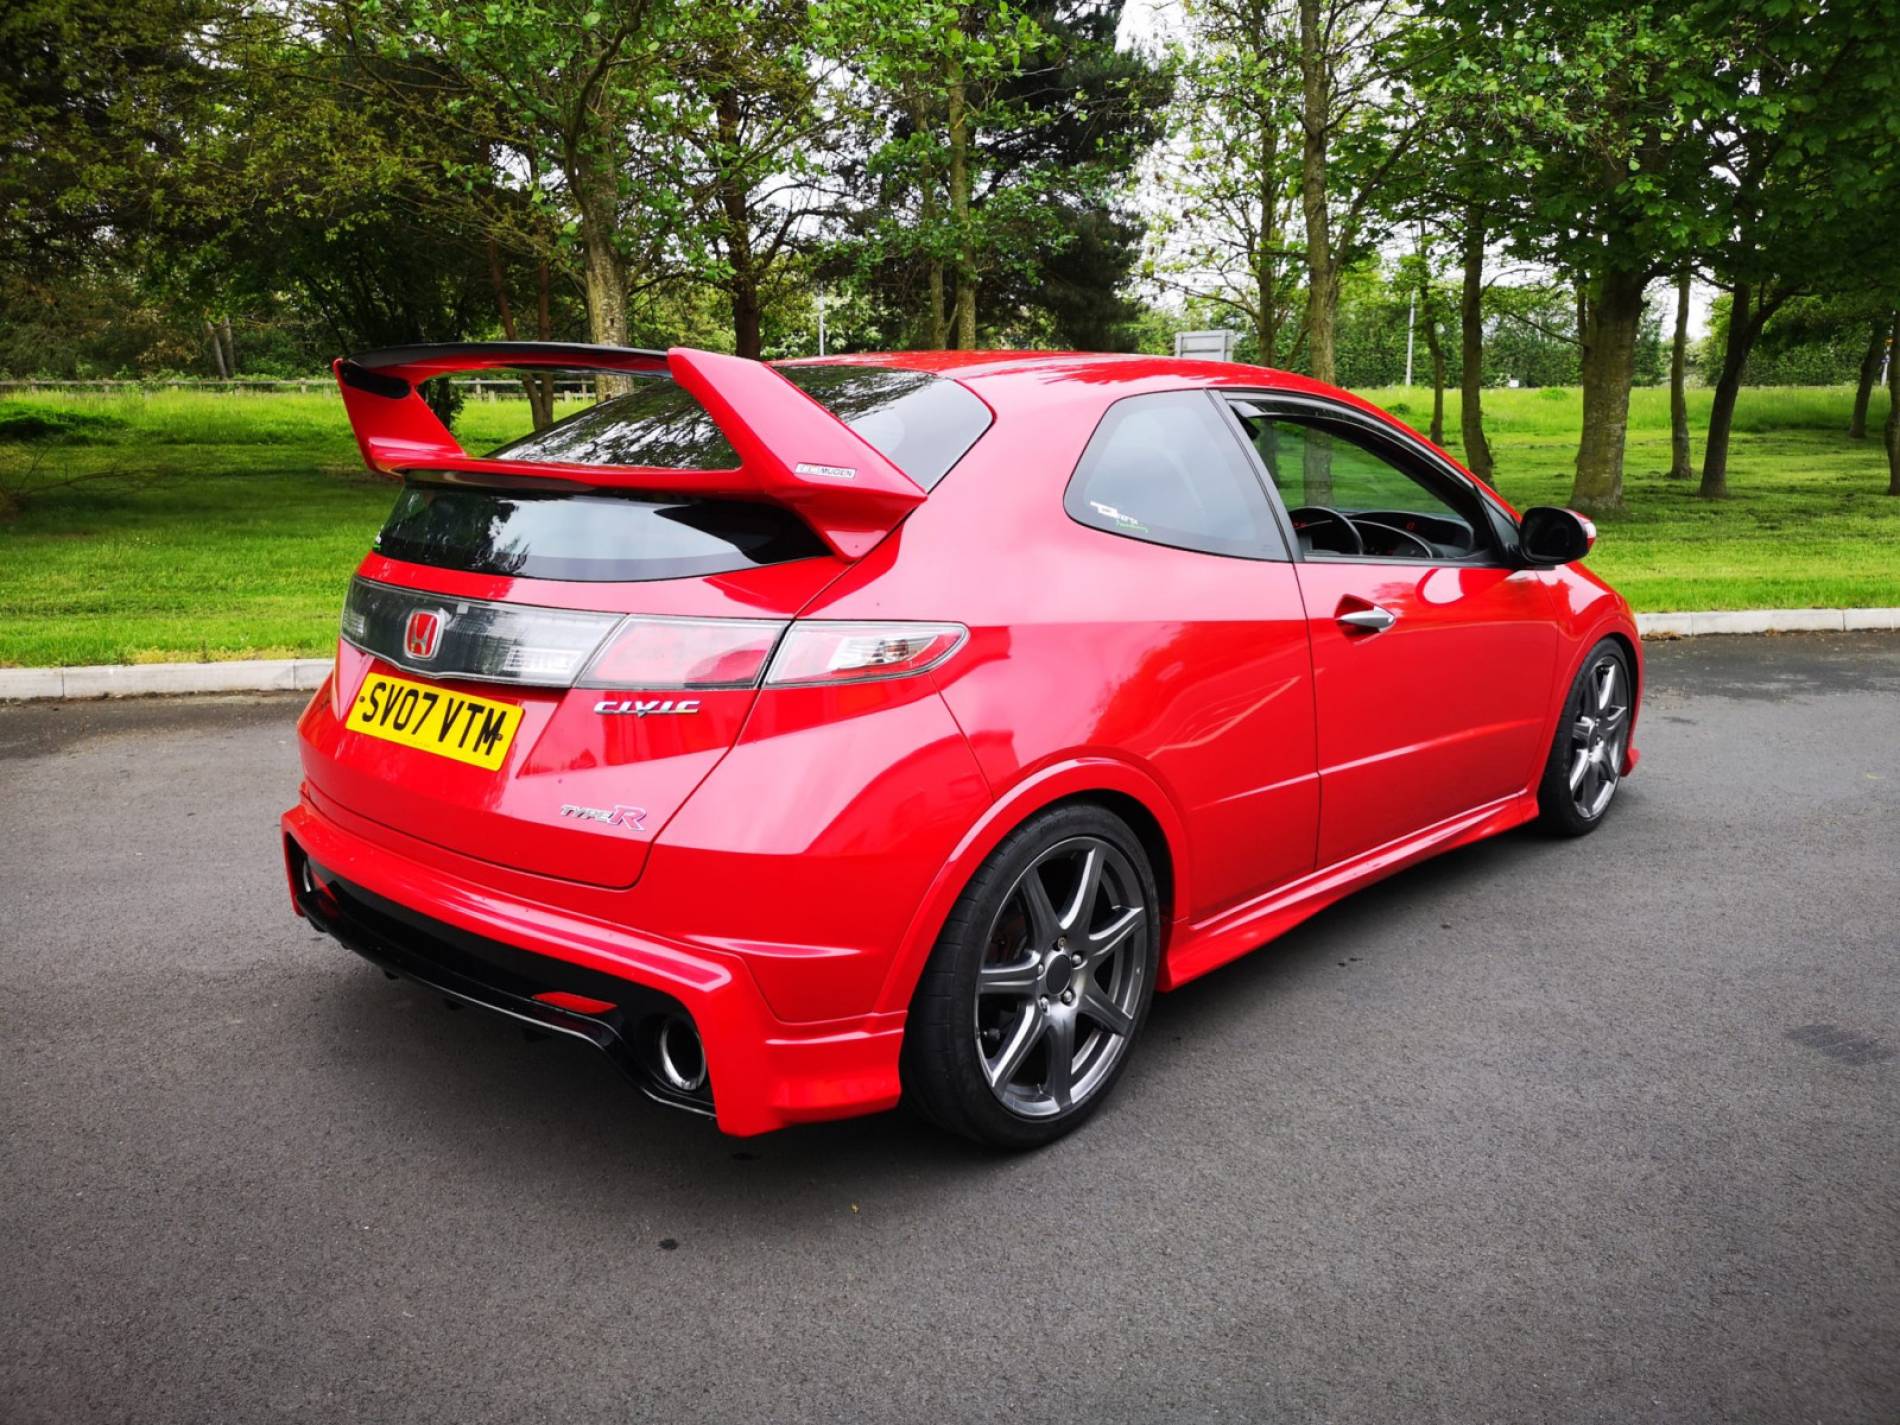 390HP Mugen FN2 Civic Type R Supercharged